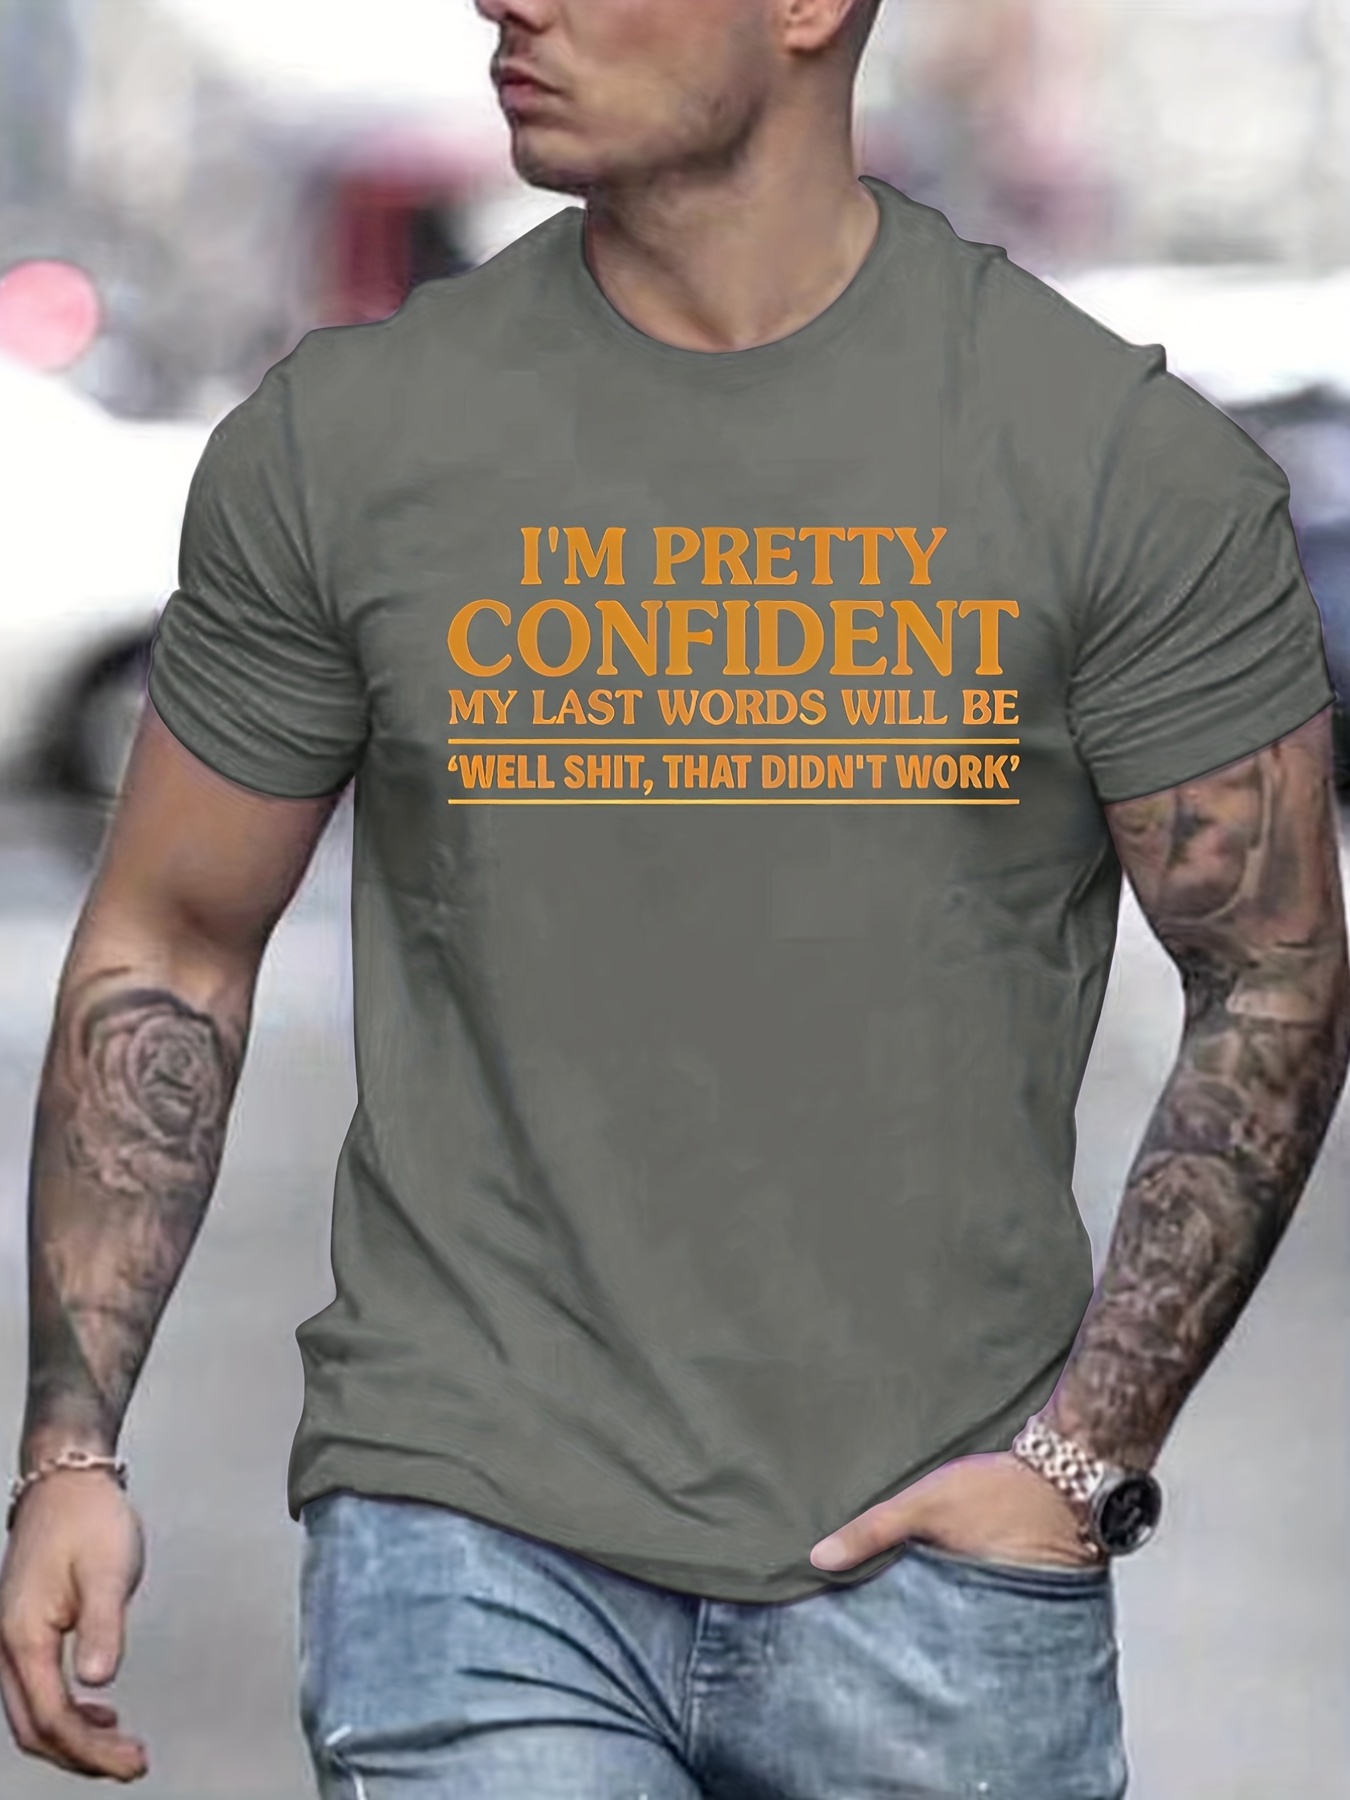 powerful slogan print mens graphic design crew neck t shirt casual comfy tees t shirts for summer mens clothing tops details 10